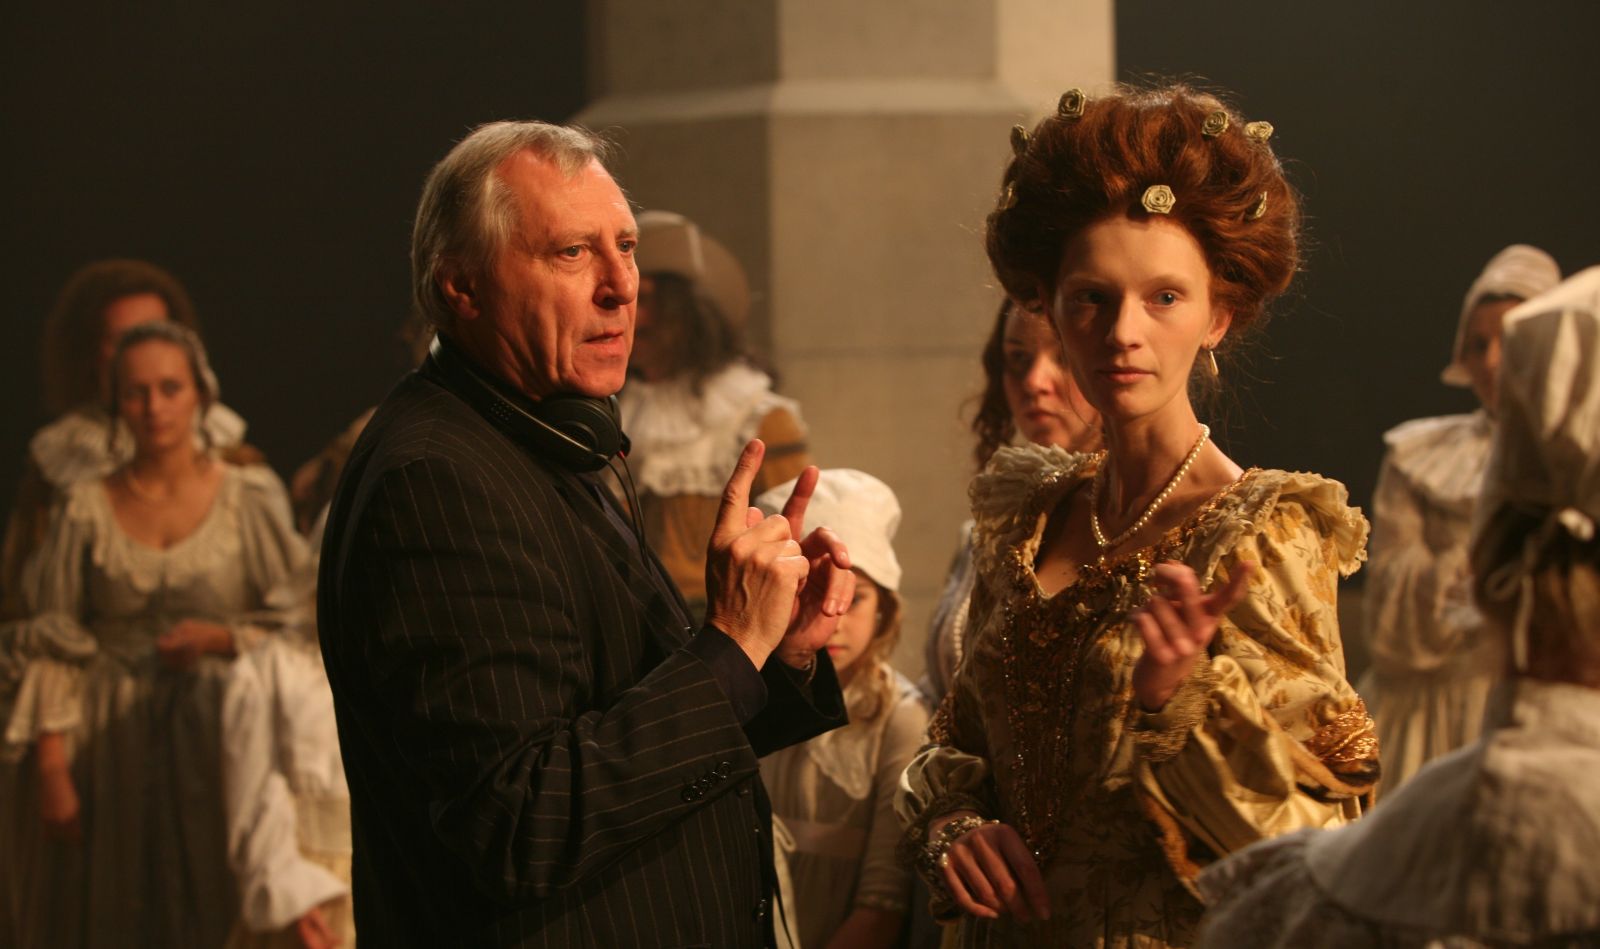 Peter Greenaway and Agata Buzek as Titia on the set NIGHTWATCHING